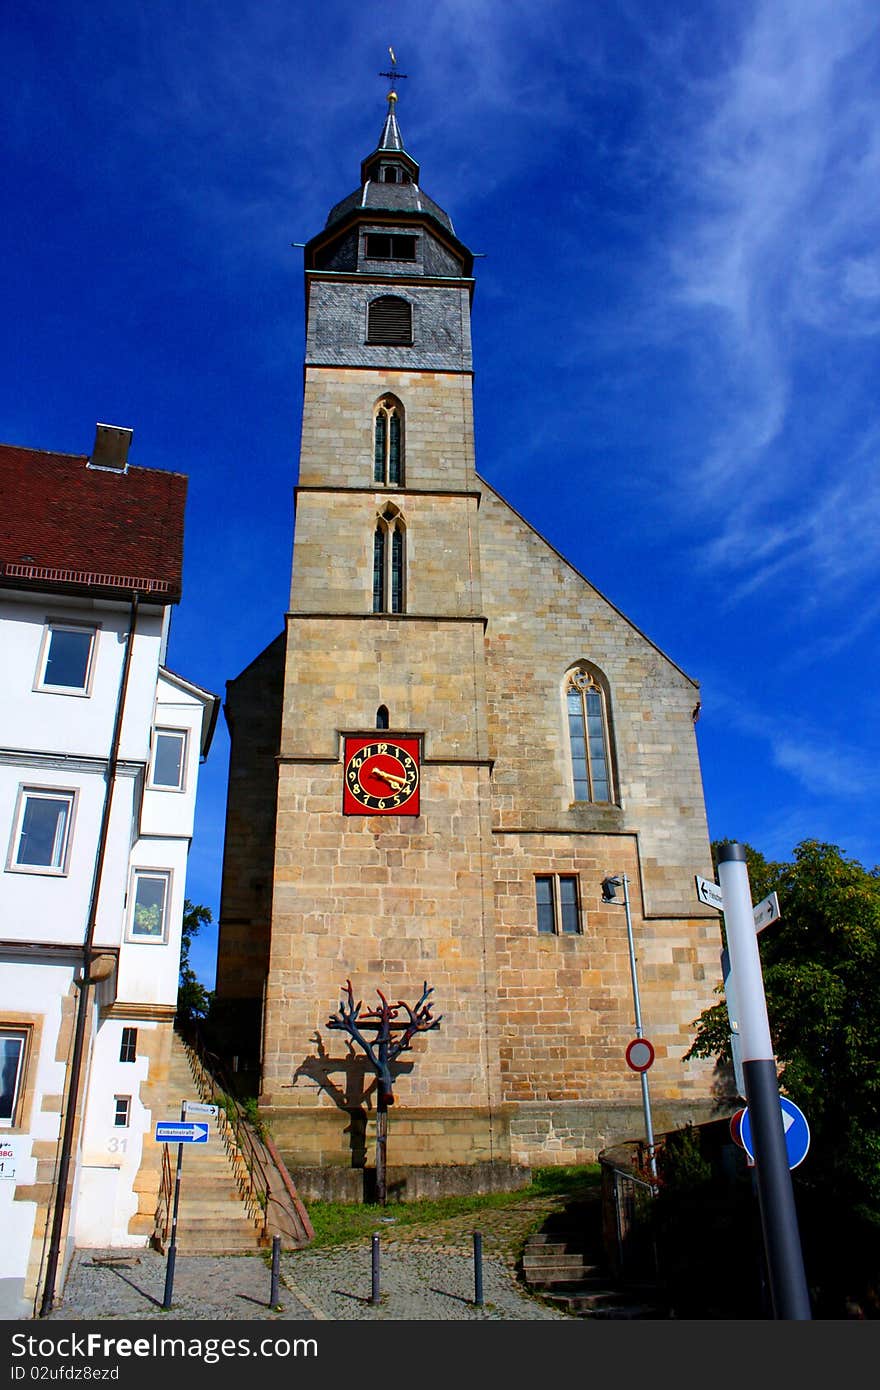 A old church in with a large steeple under a blue sky with a wooden cross and a red clock in Stuttgart in Germany. A old church in with a large steeple under a blue sky with a wooden cross and a red clock in Stuttgart in Germany